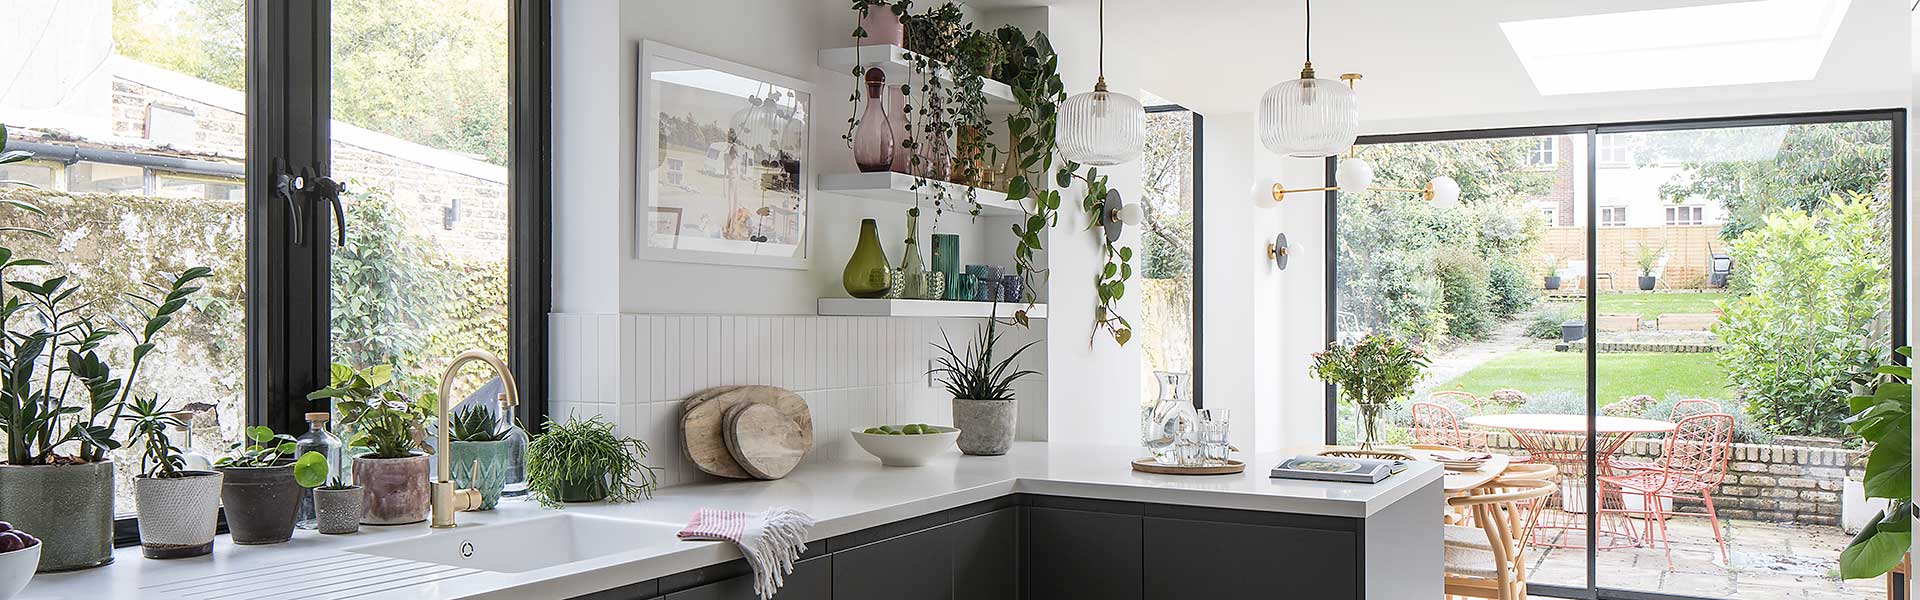 Melbourne-inspired home kitchen with plant life, full length doors and windows onto substantial garden